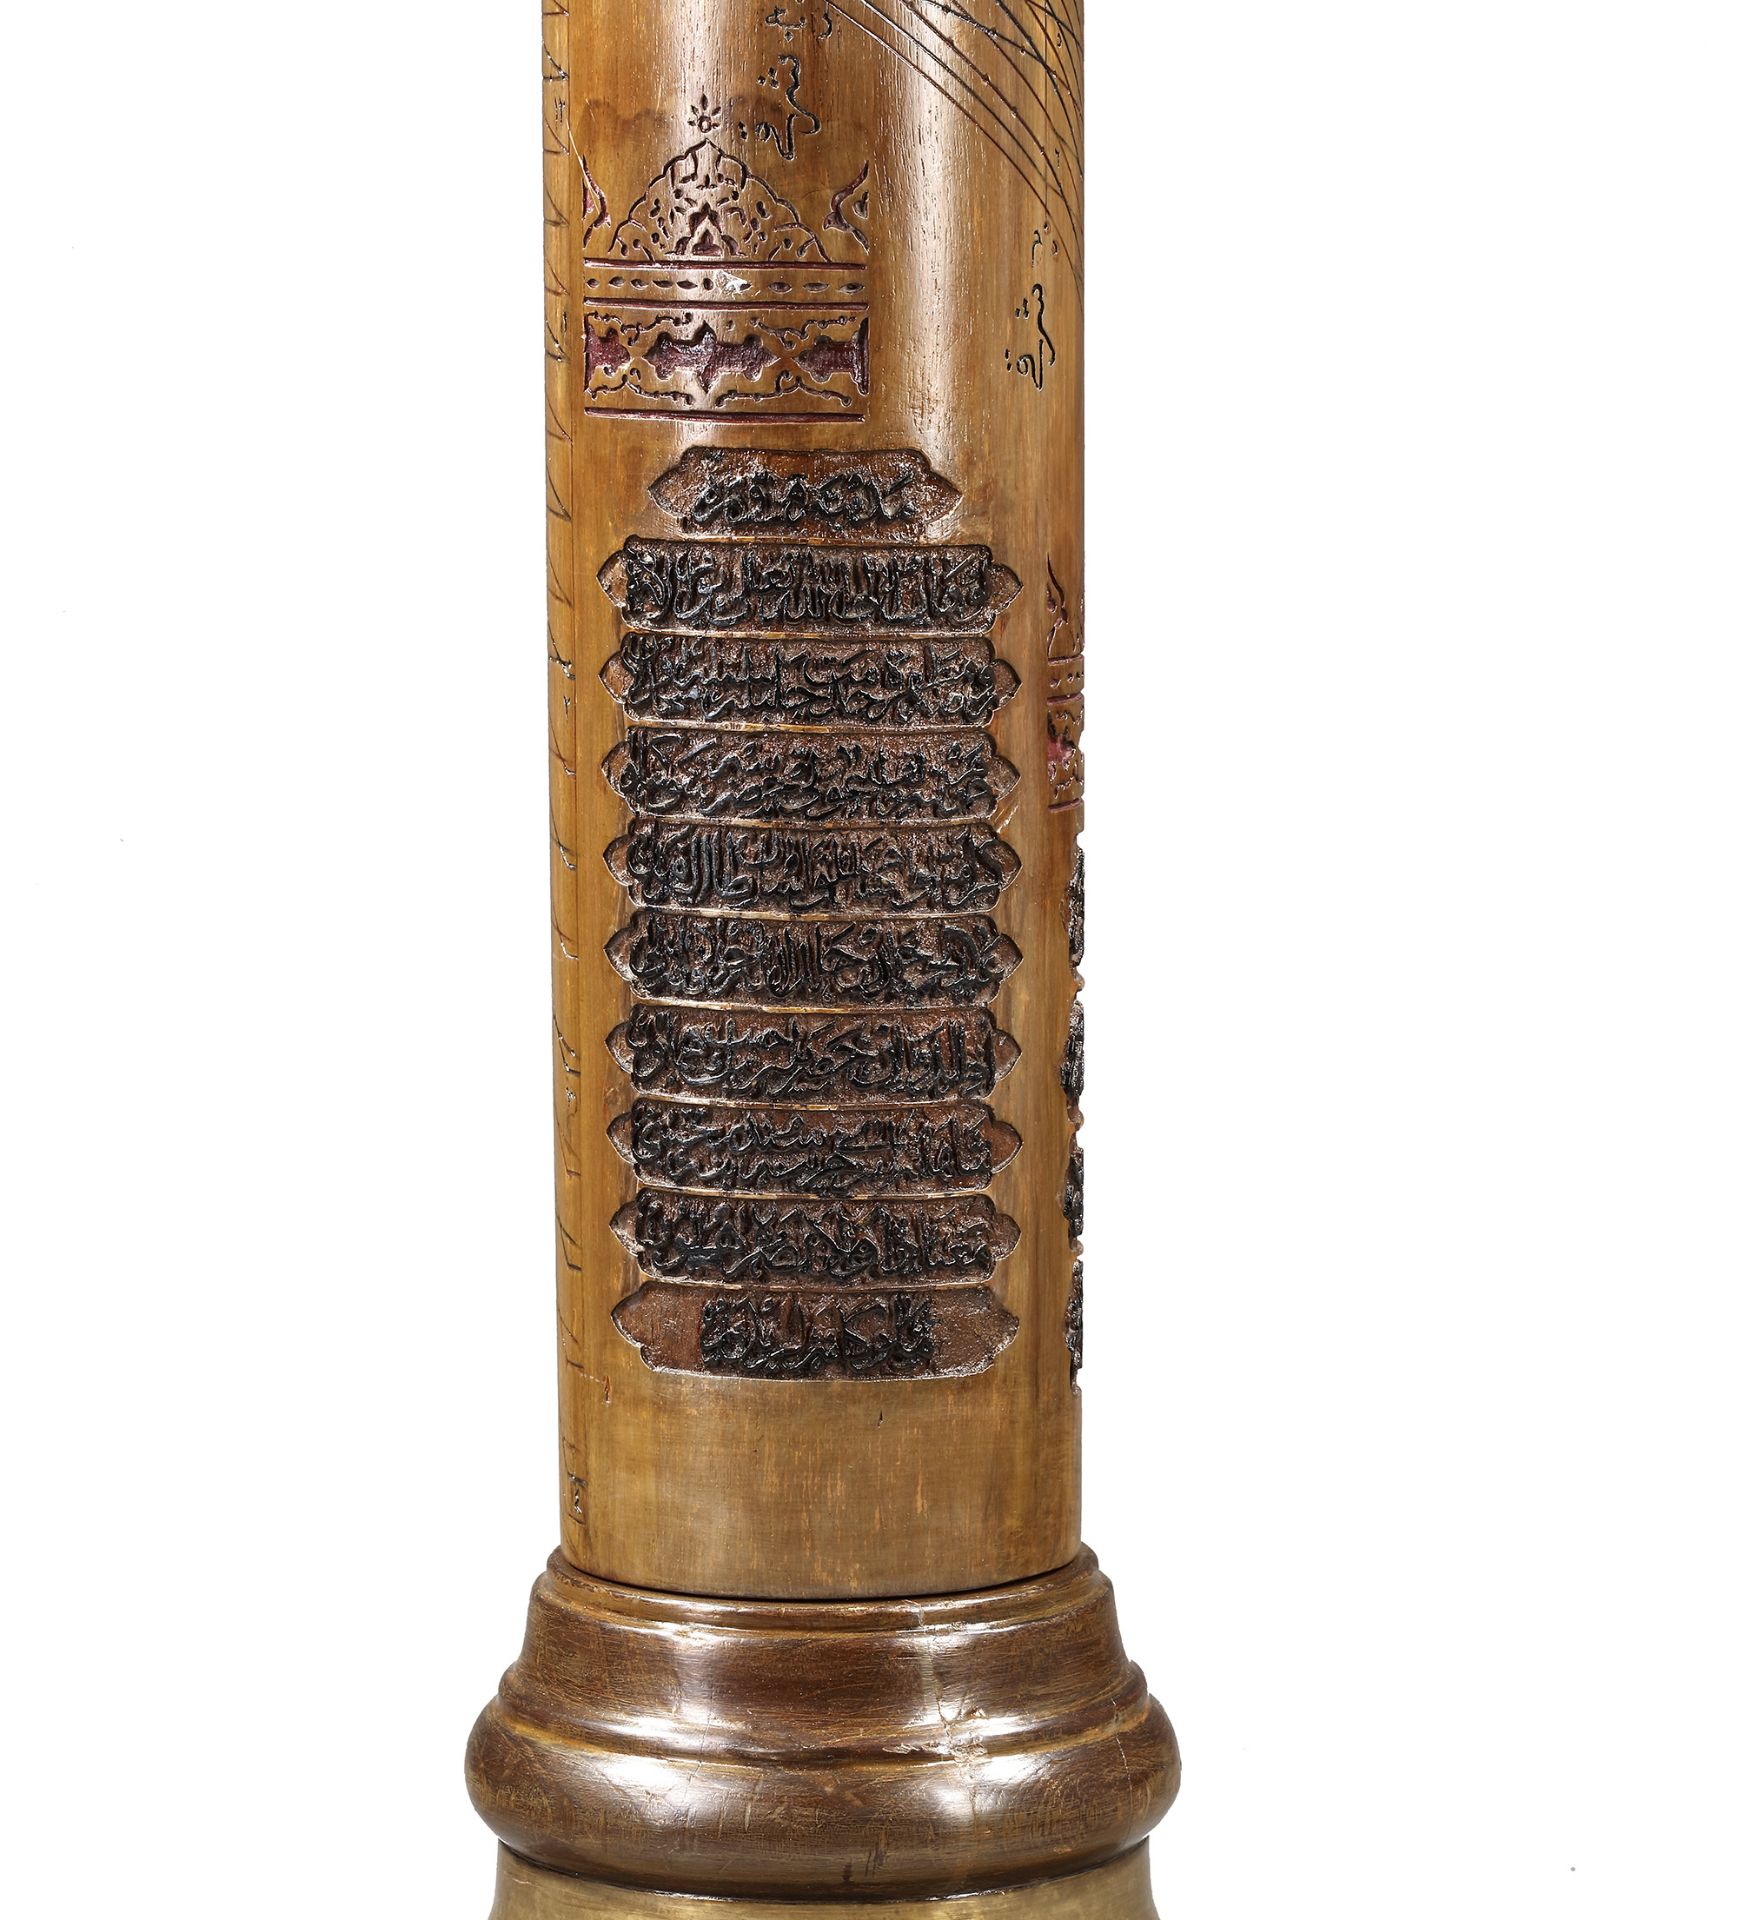 AN EXCEPTIONALLY RARE AND MONUMENTAL OTTOMAN SUNDIAL SENT AS GIFT TO MEDINA, PROBABLY BY SULTAN ABDU - Image 4 of 7